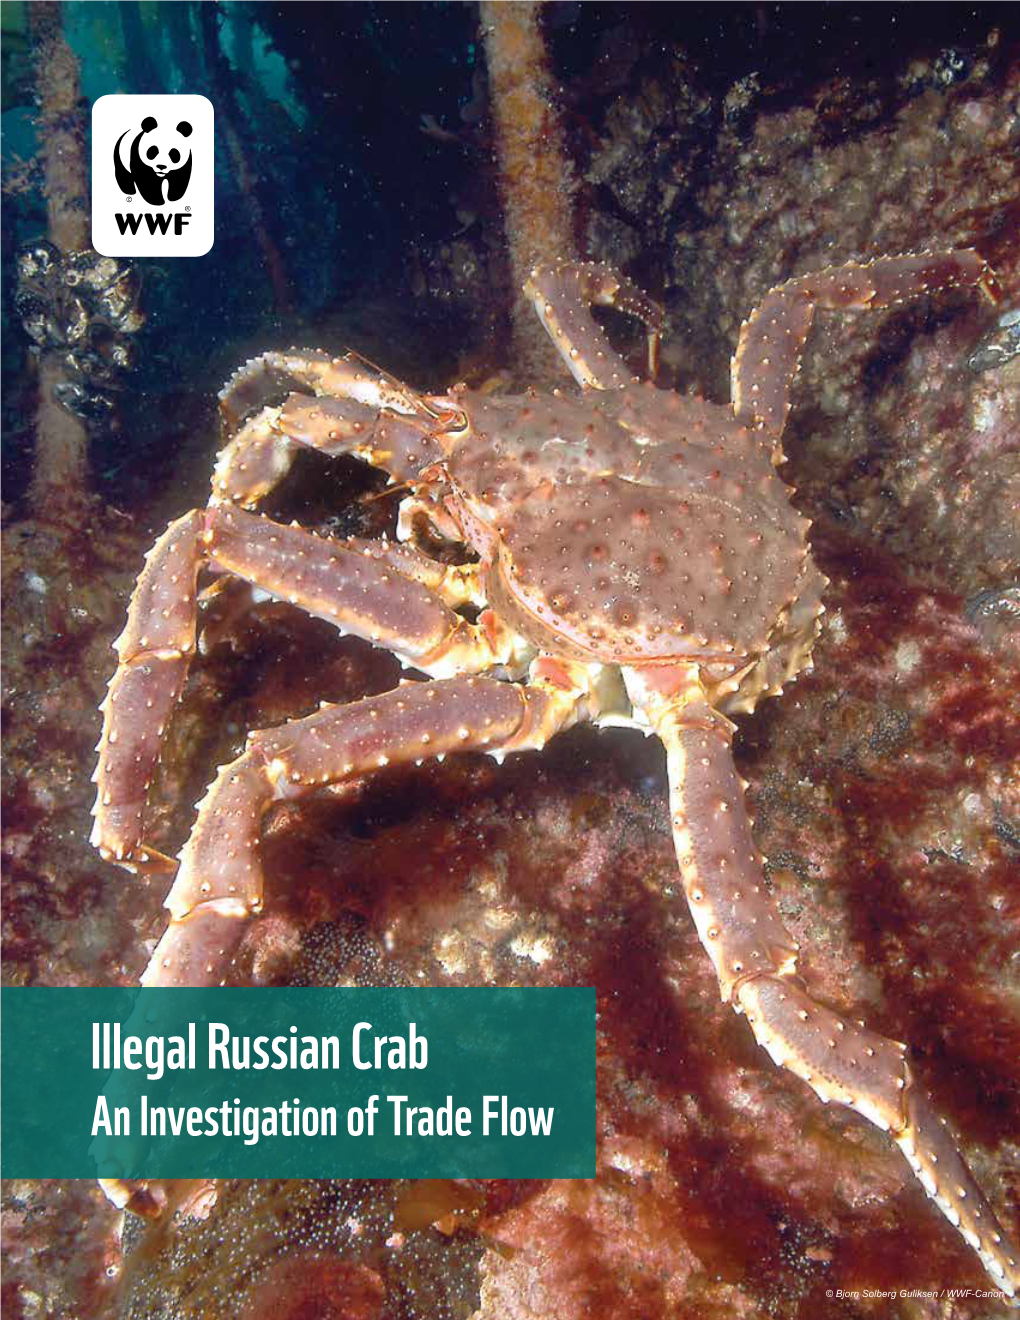 Illegal Russian Crab an Investigation of Trade Flow